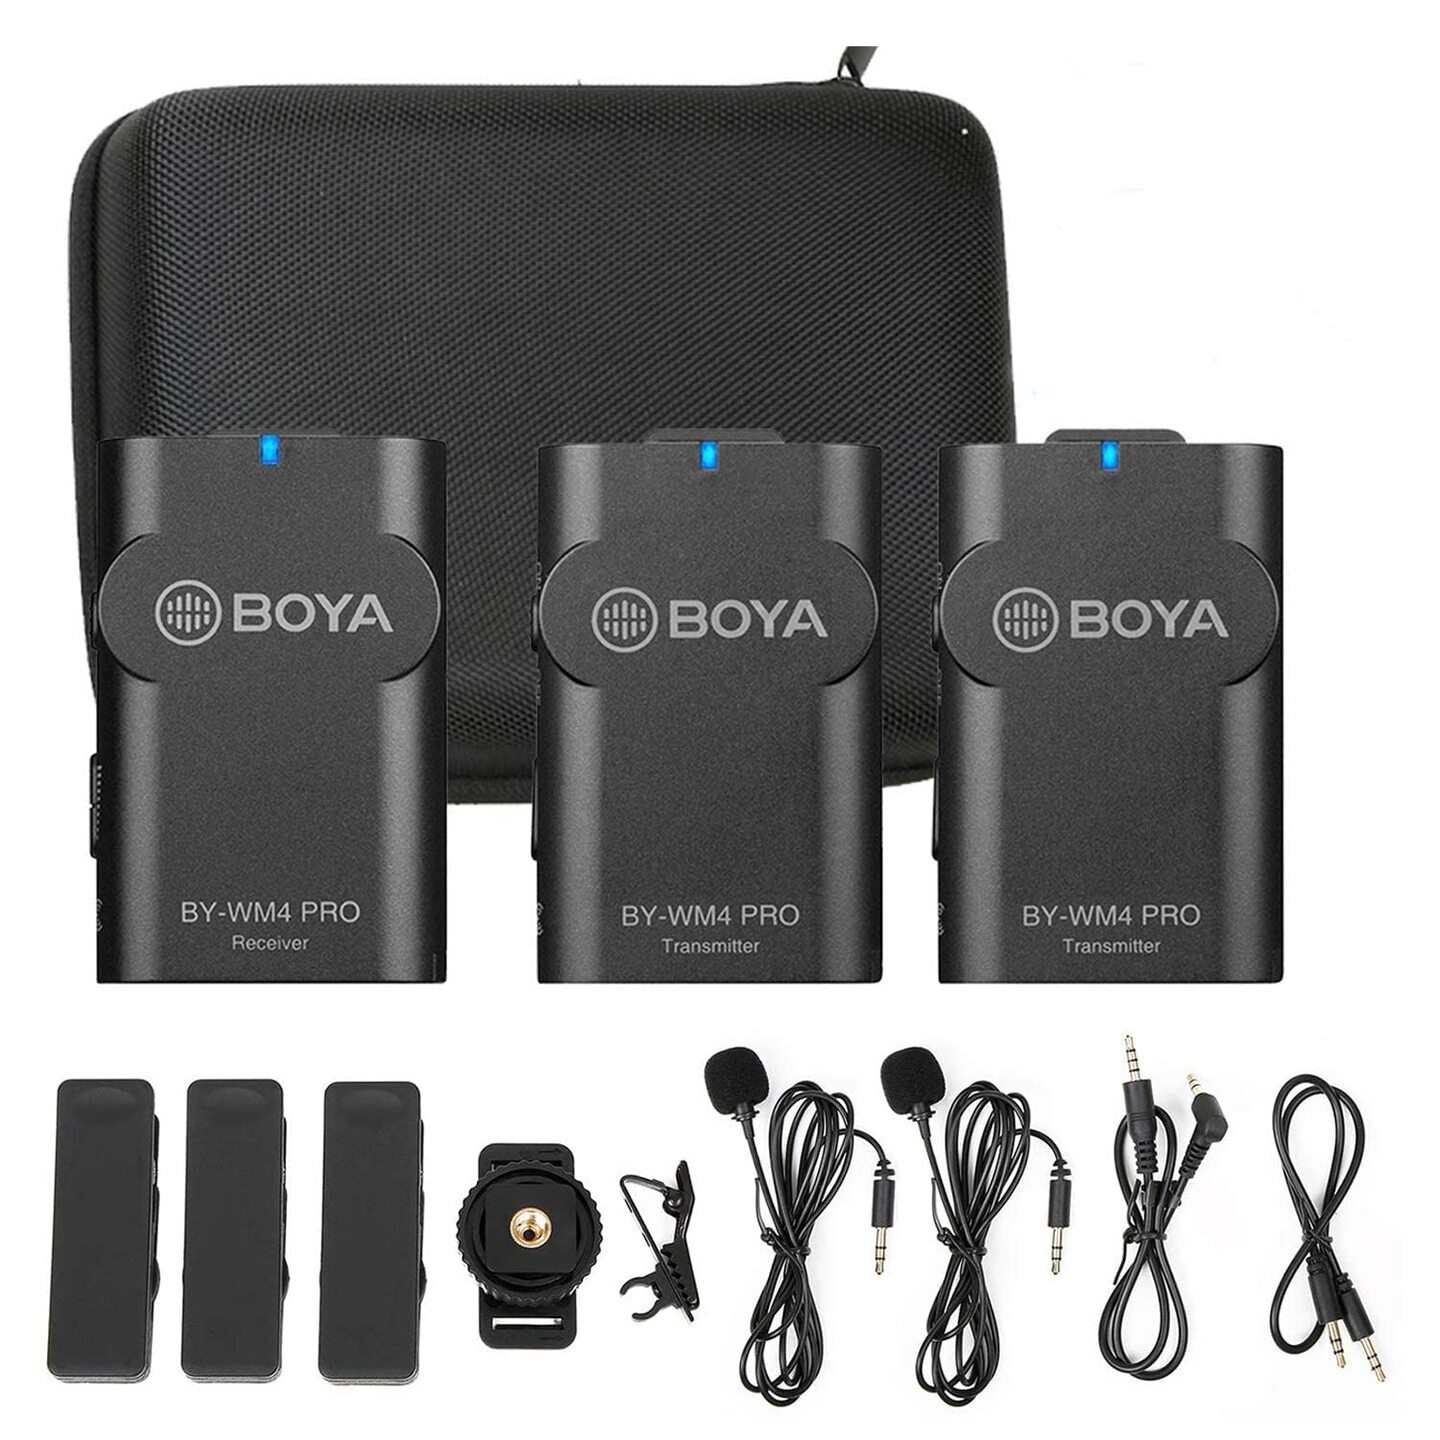 BOYA 2.4GHz Wireless Lavalier Microphone System BY-WM4 PRO-K2 for all Android, iPhone and DSLR